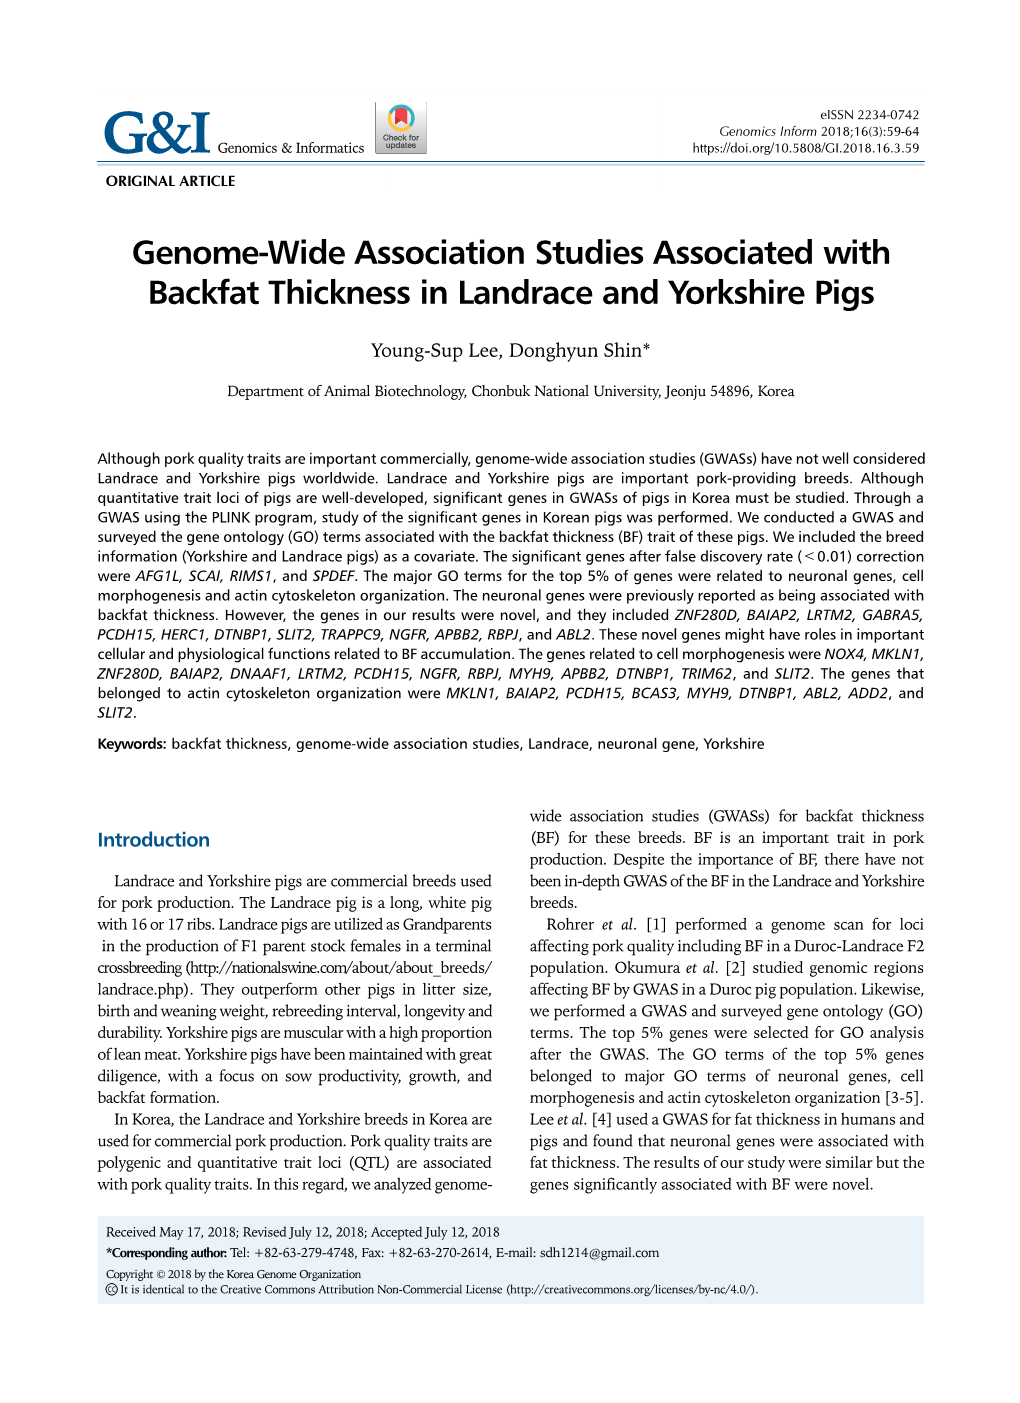 Genome-Wide Association Studies Associated with Backfat Thickness in Landrace and Yorkshire Pigs